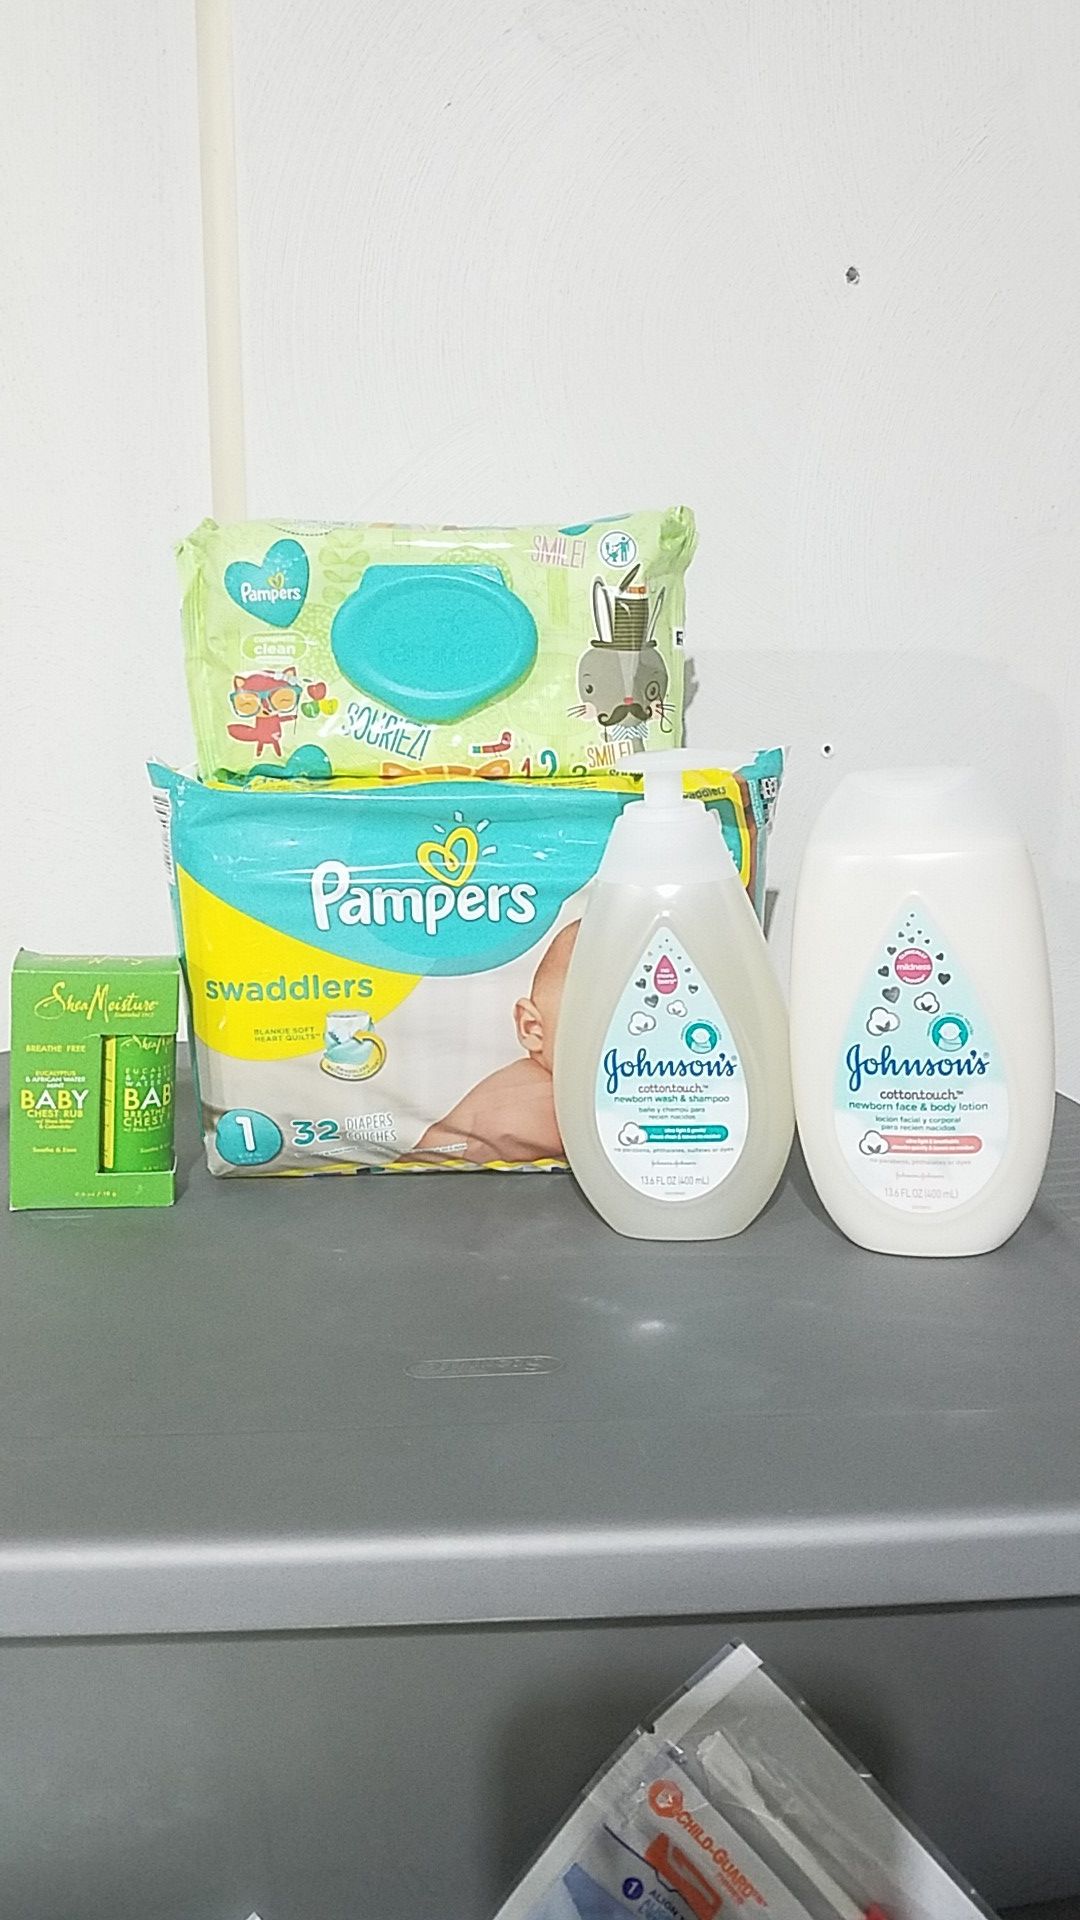 Pampers & Johnsons Baby bundle